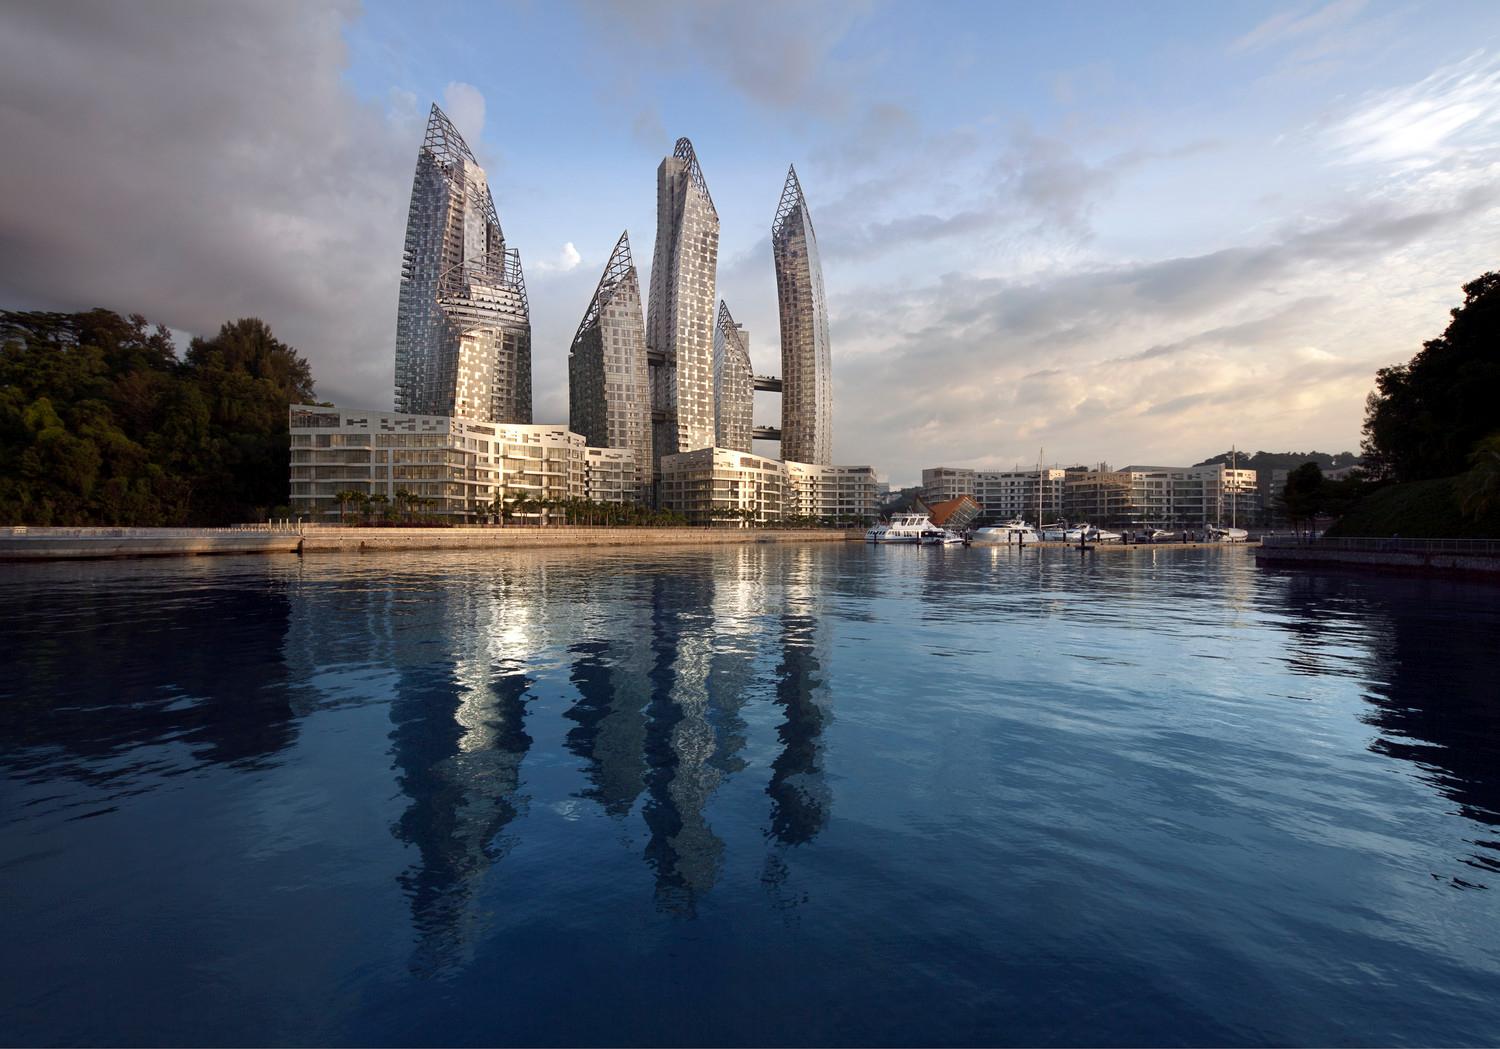 Reflections at Keppel Bay - A symphony of towers and undulating villas beautifully reflected on the water during sunrise and sunset.